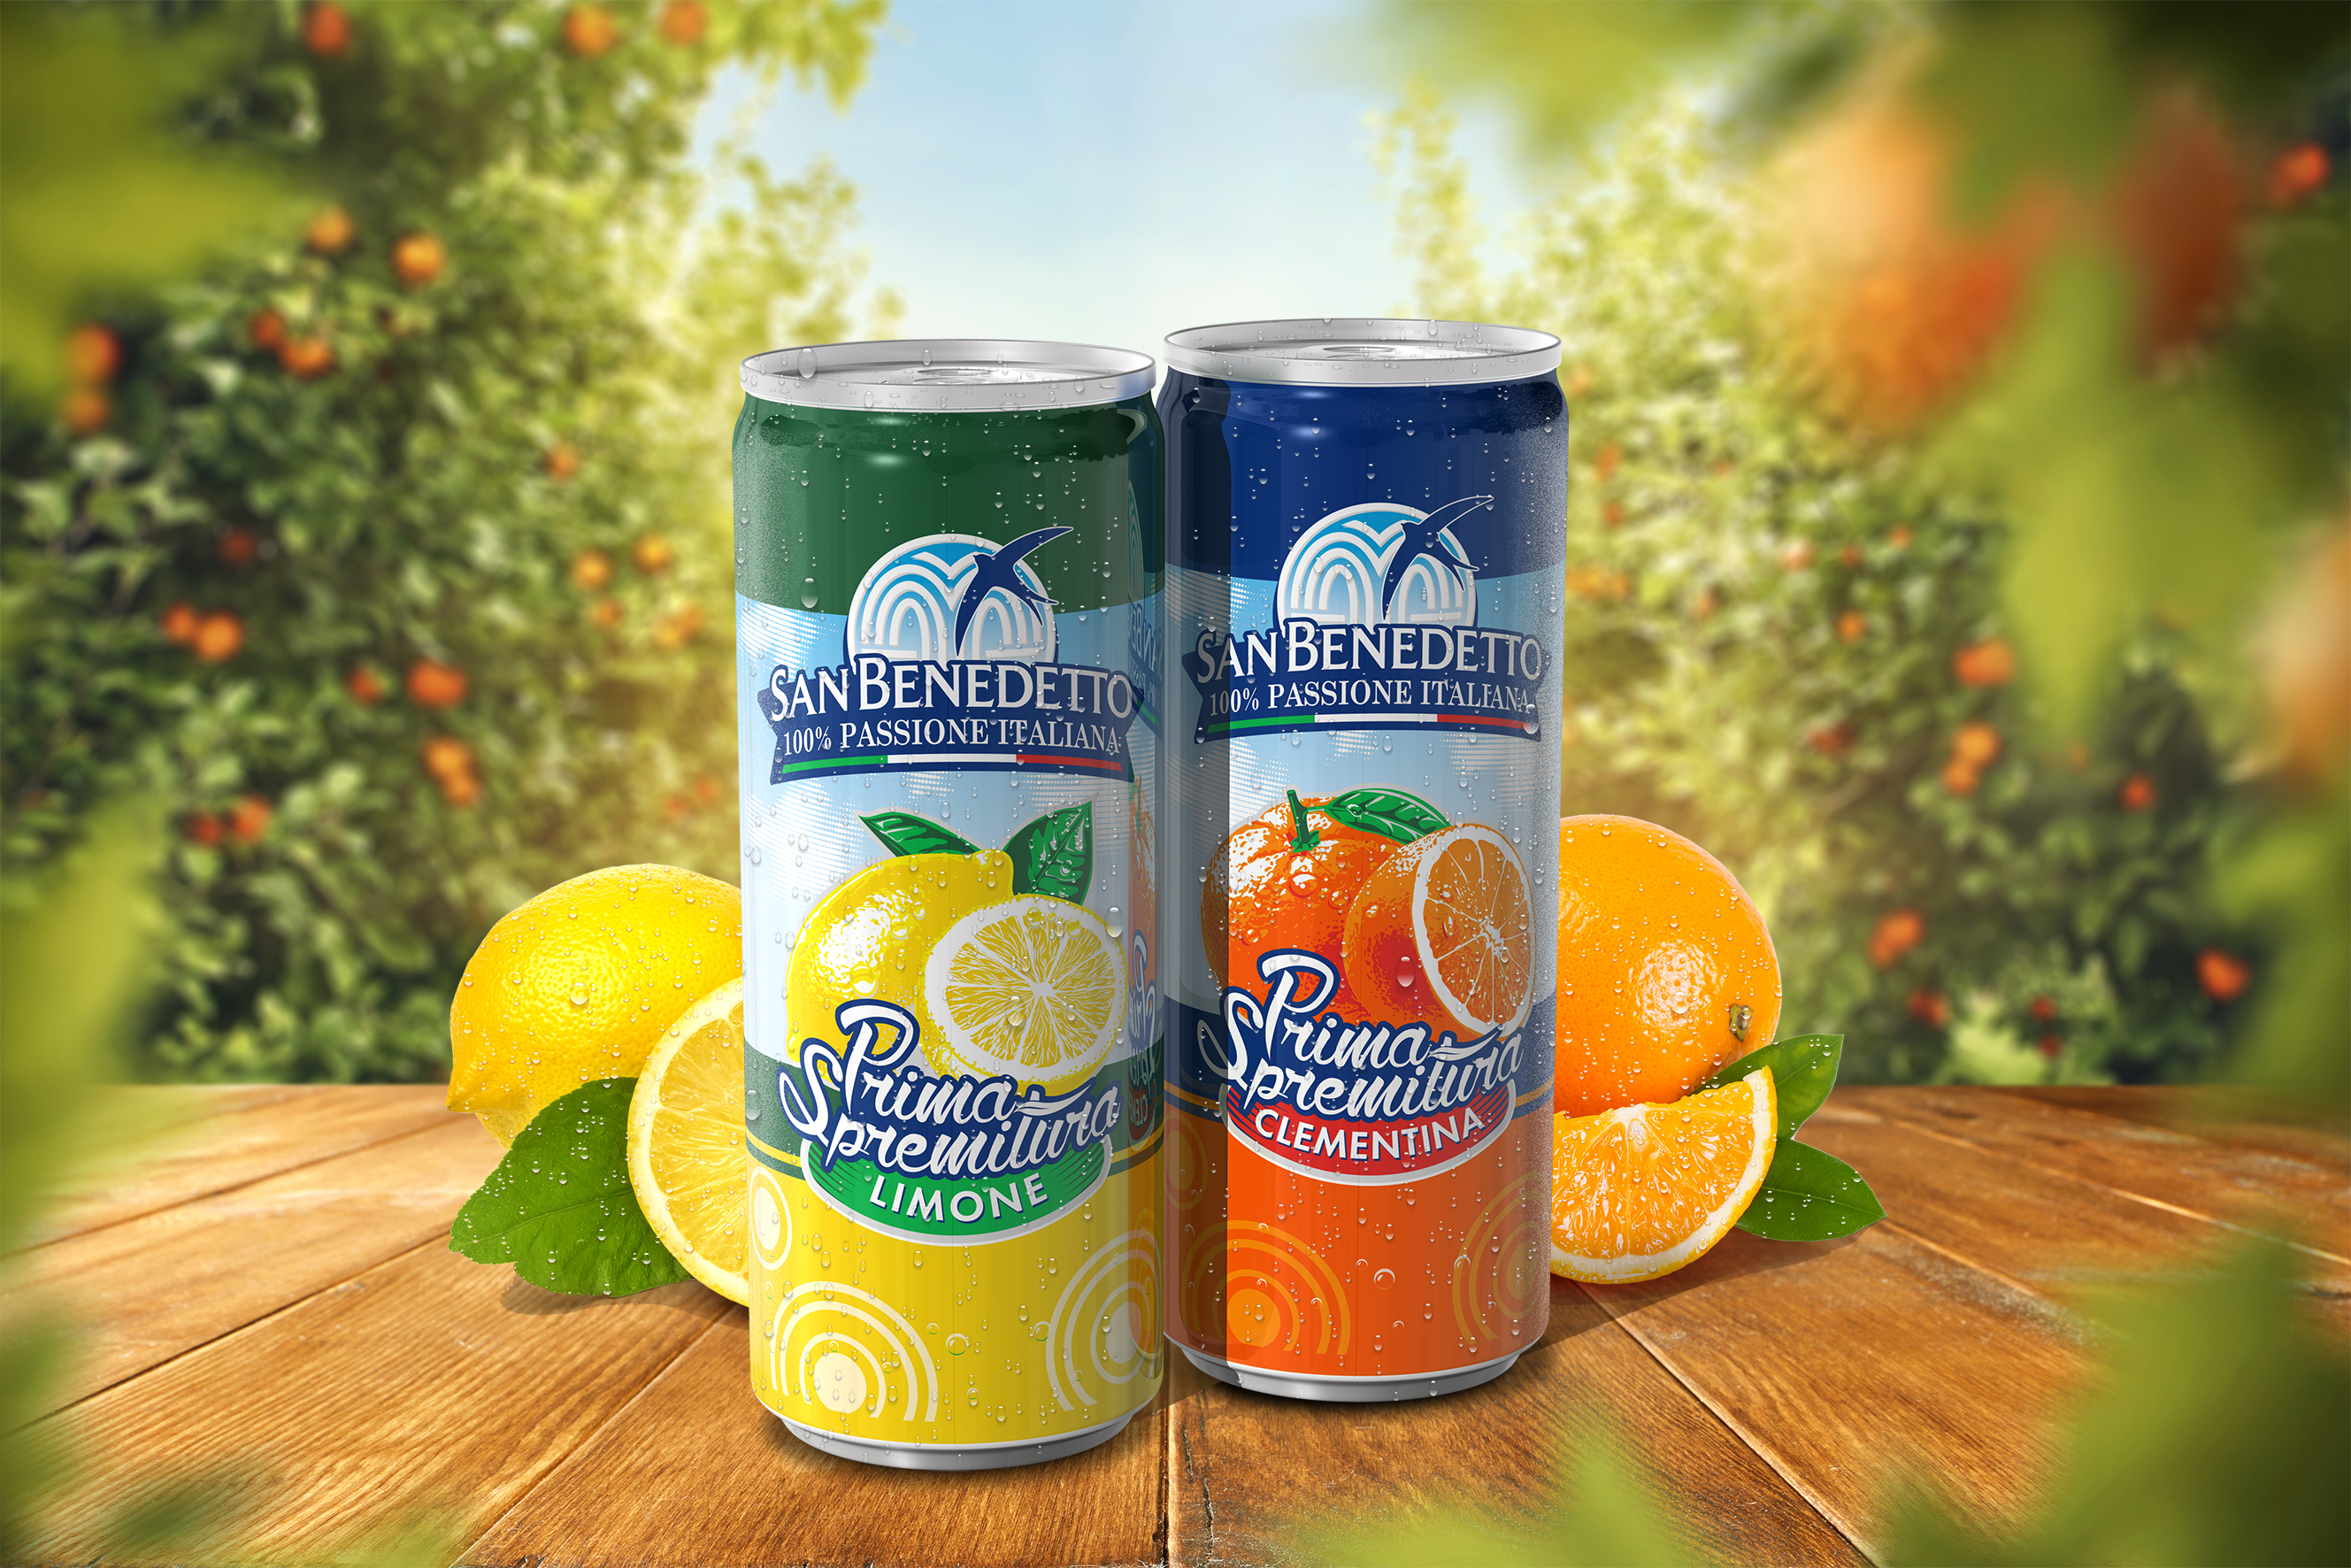 Barr Soft Drinks partners with San Benedetto